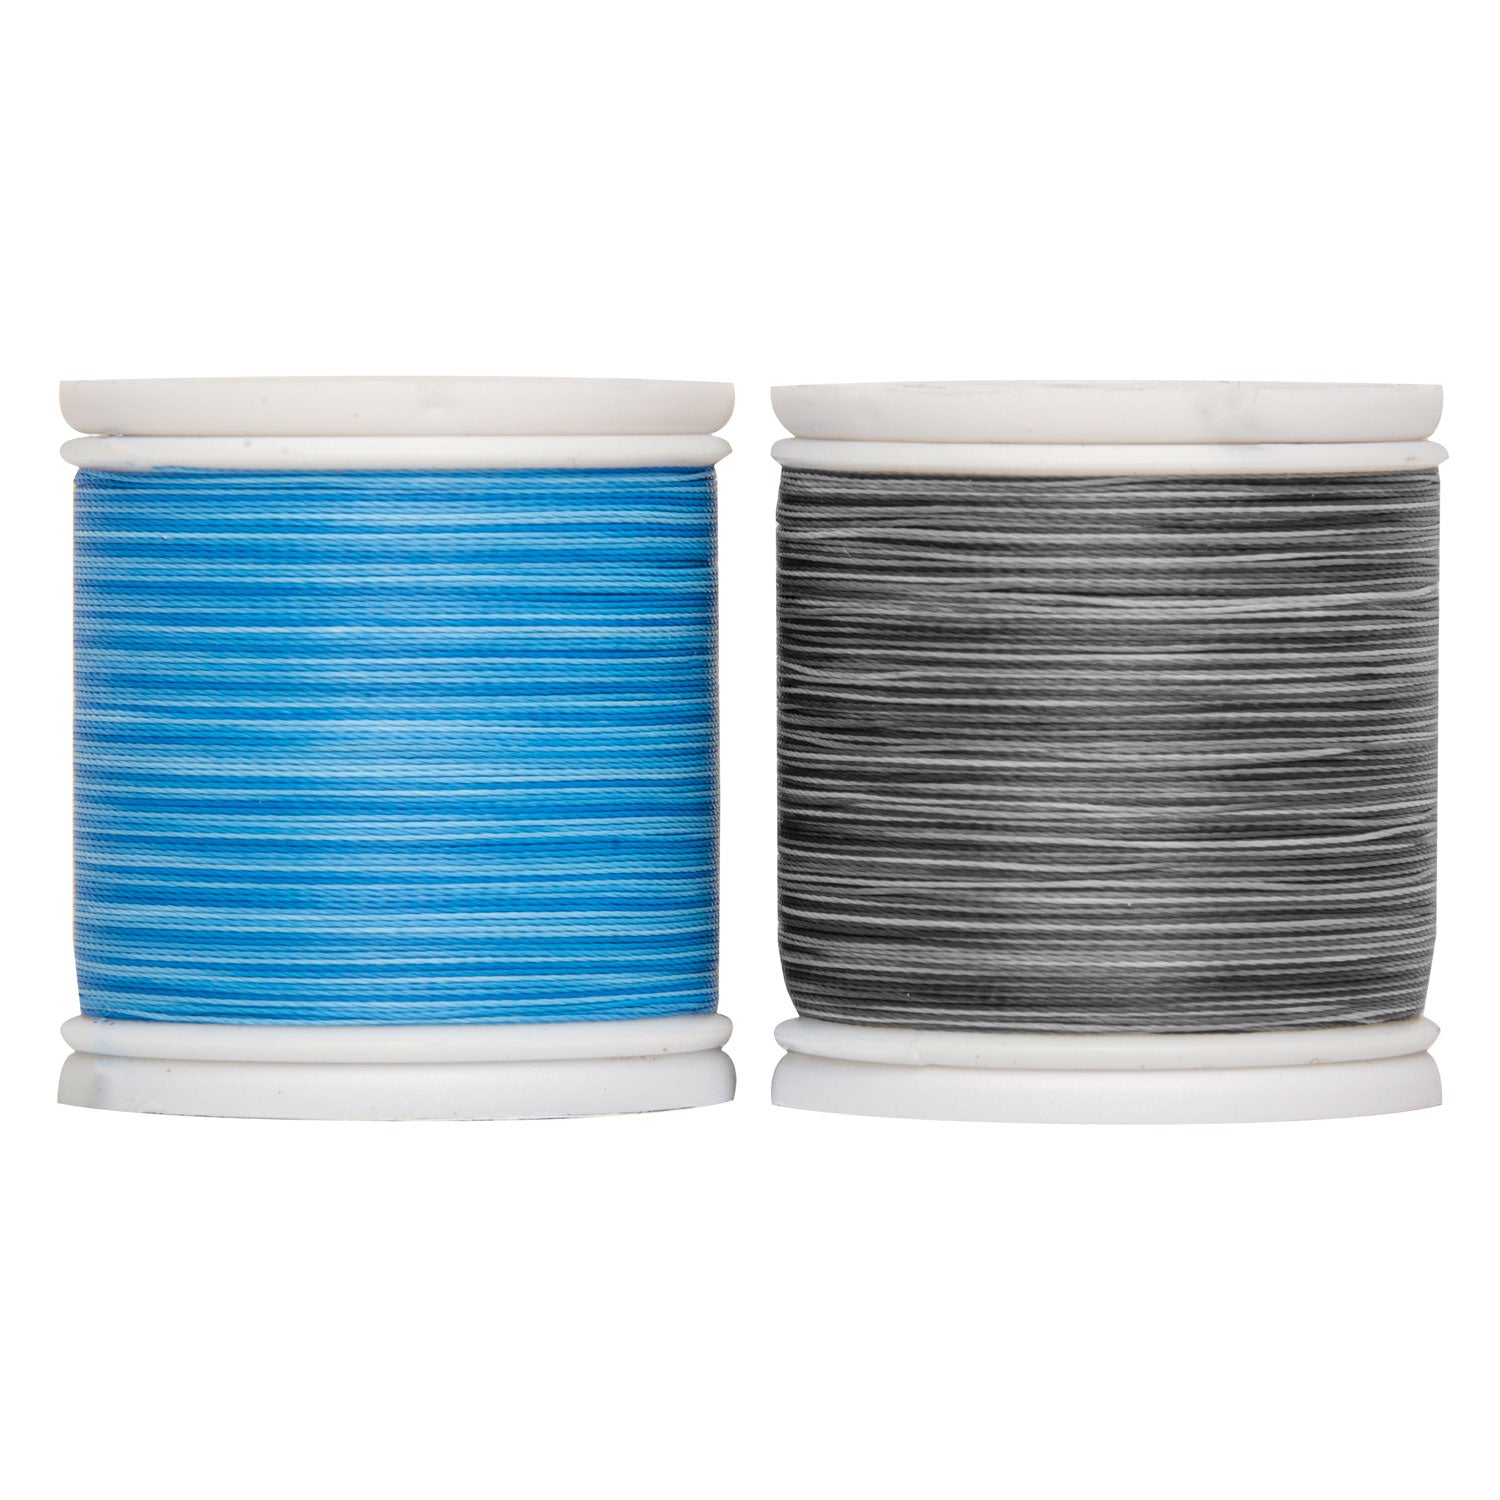 ProWrap Rod Building Thread By ProProducts The Custom, 55% OFF